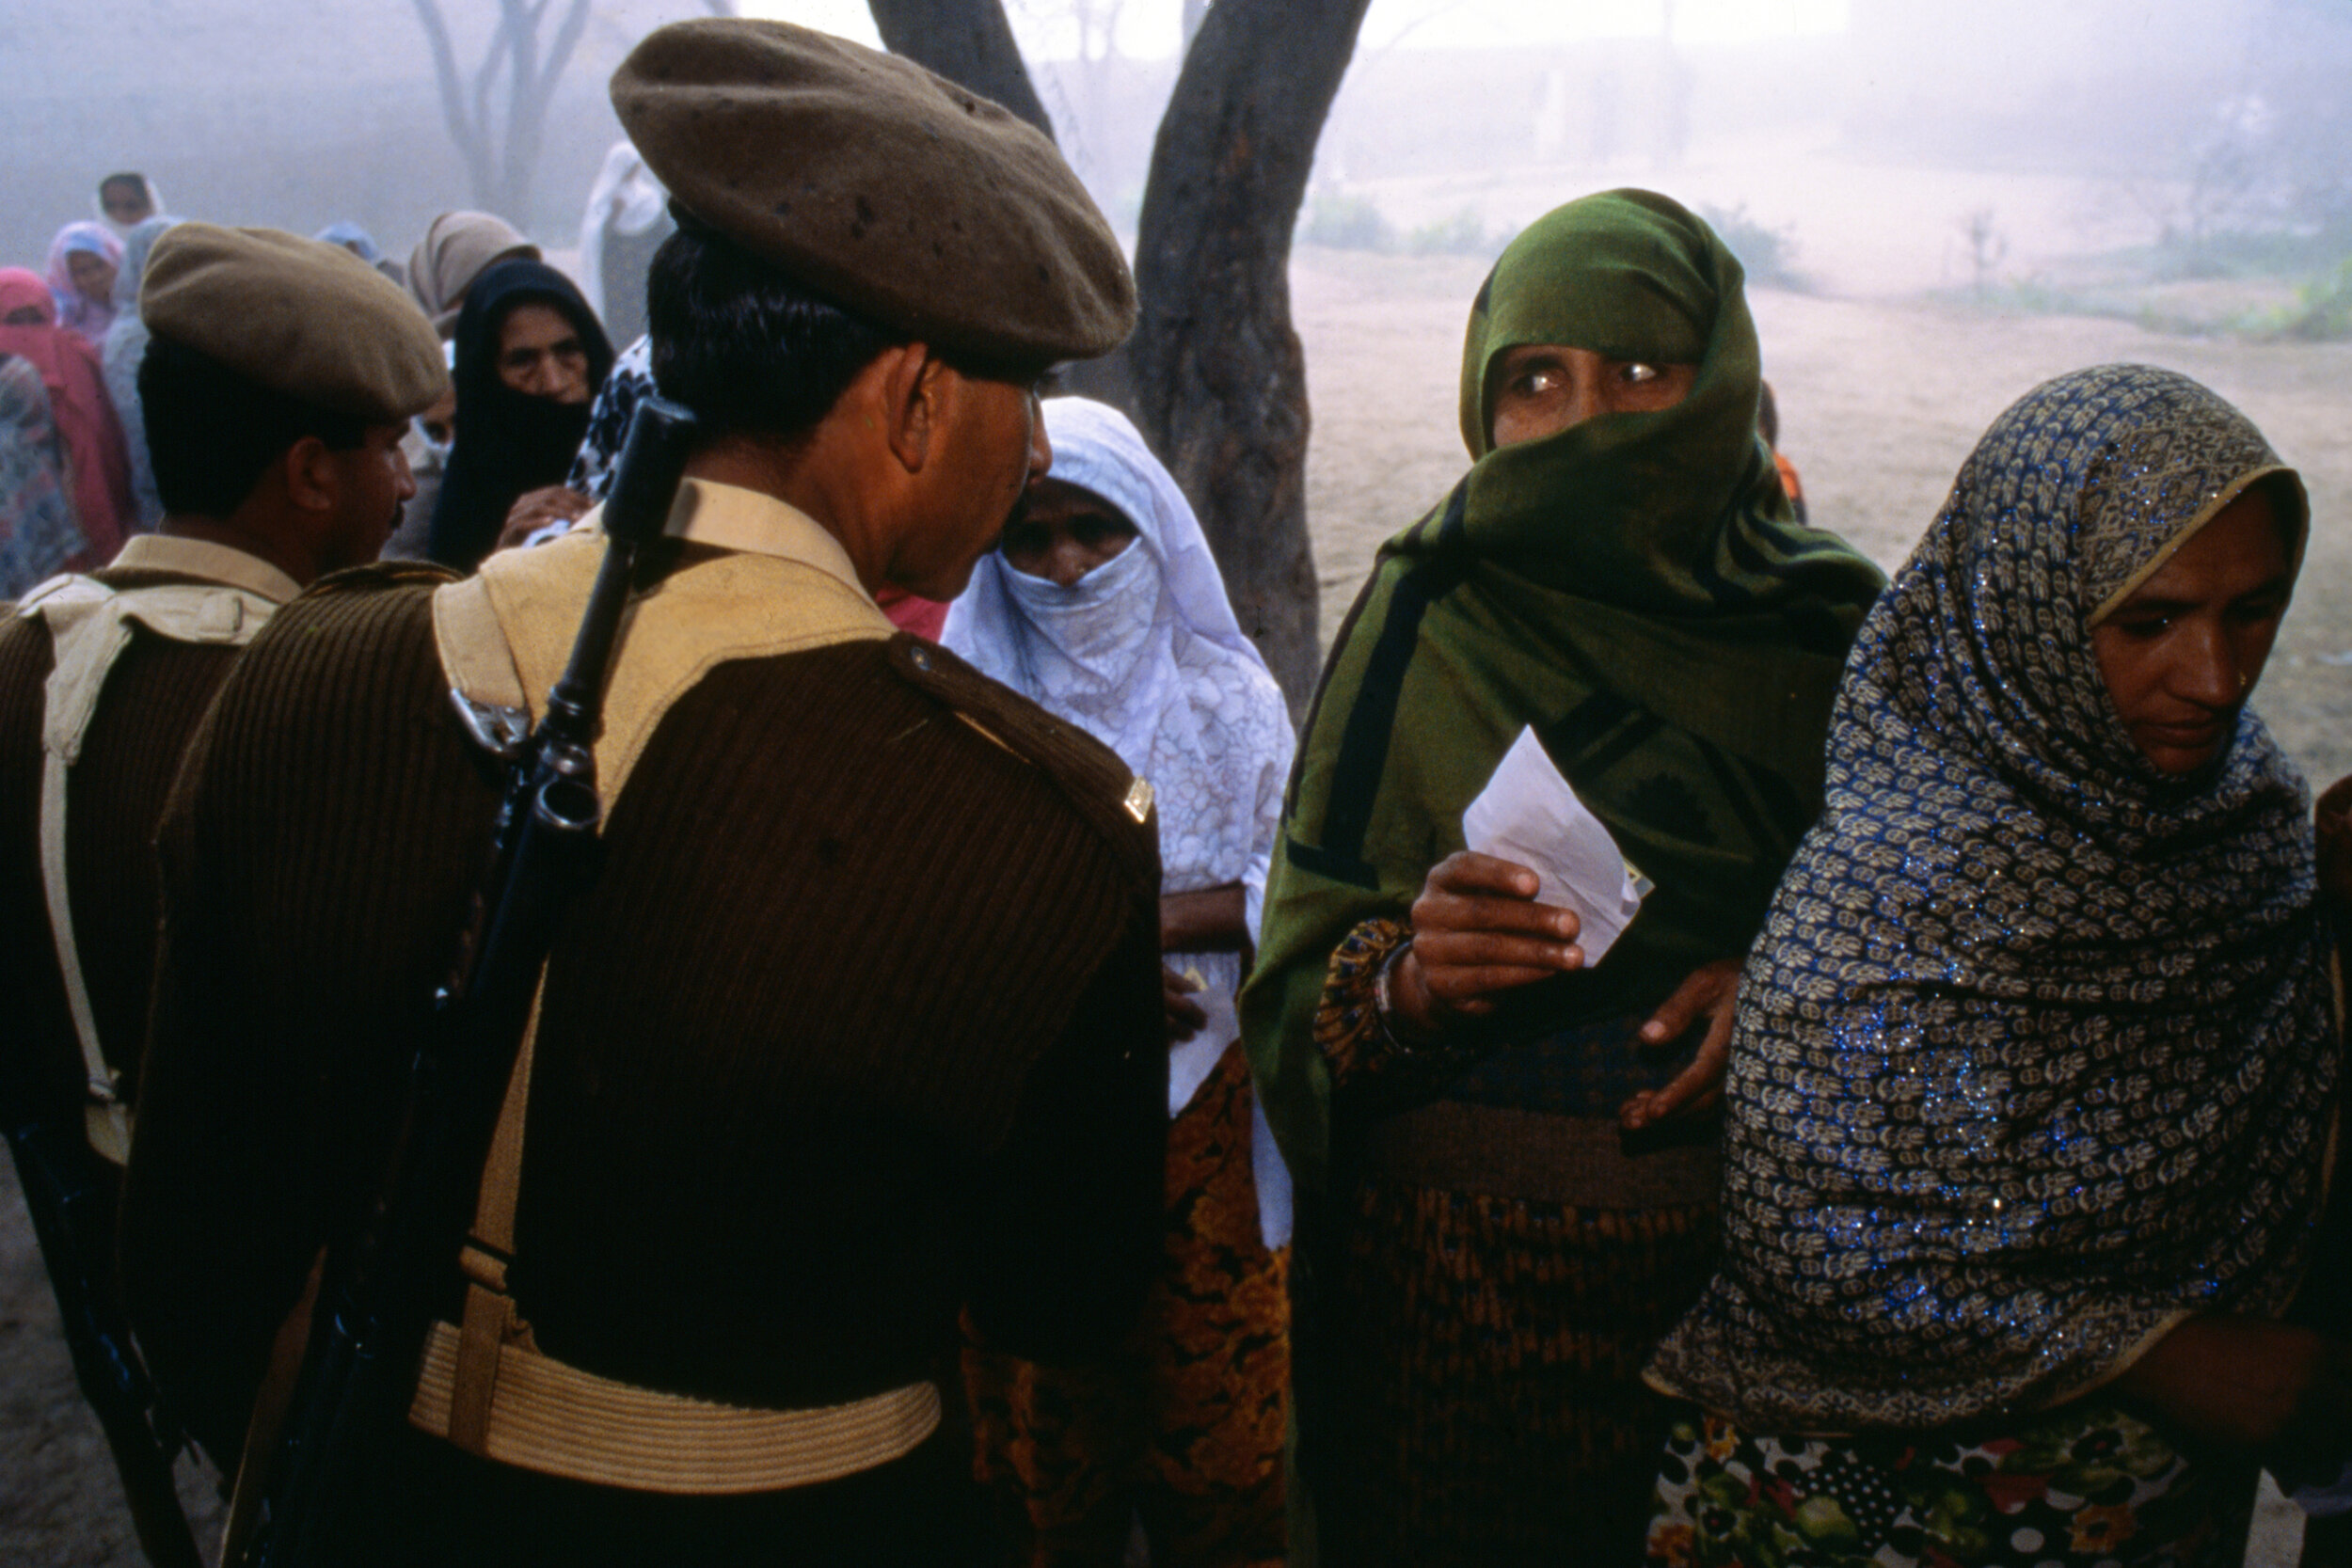  Women in the village of Sharqpur que up to cast their votes while soldiers guarantee a peaceful election day. Punjab, Pakistan. 1998 